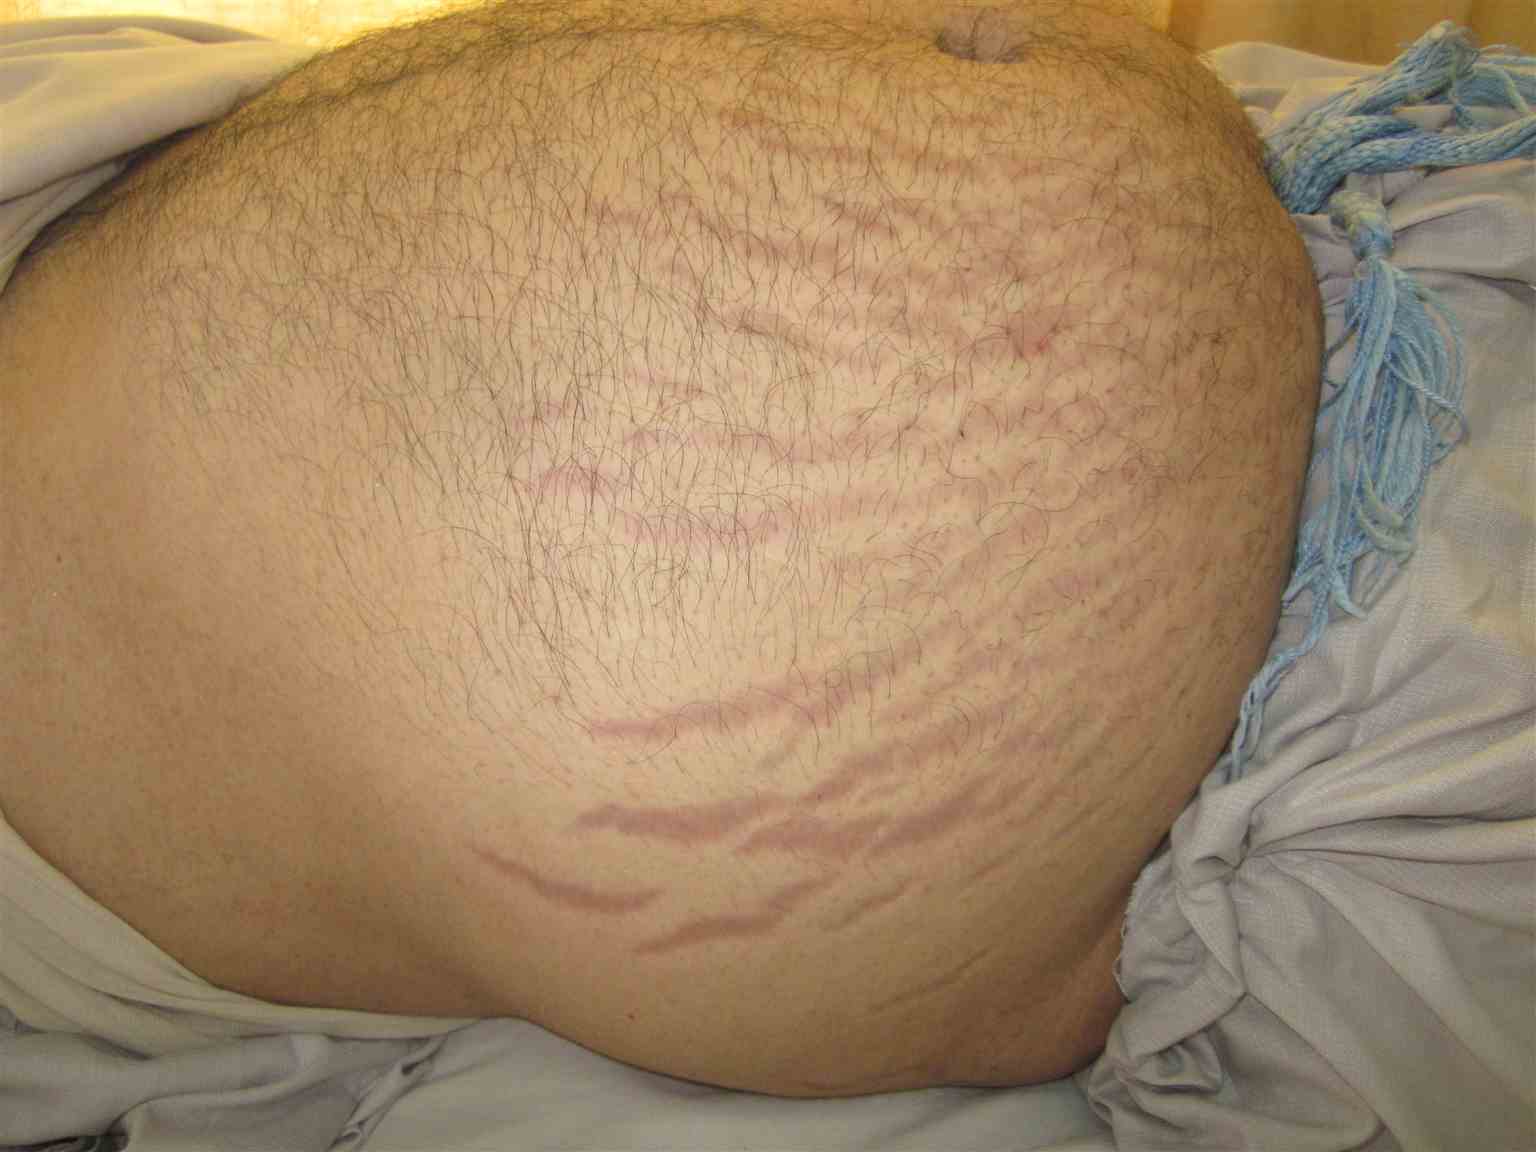 Vertical purplish abdominal striae in a patient with Cushing syndrome